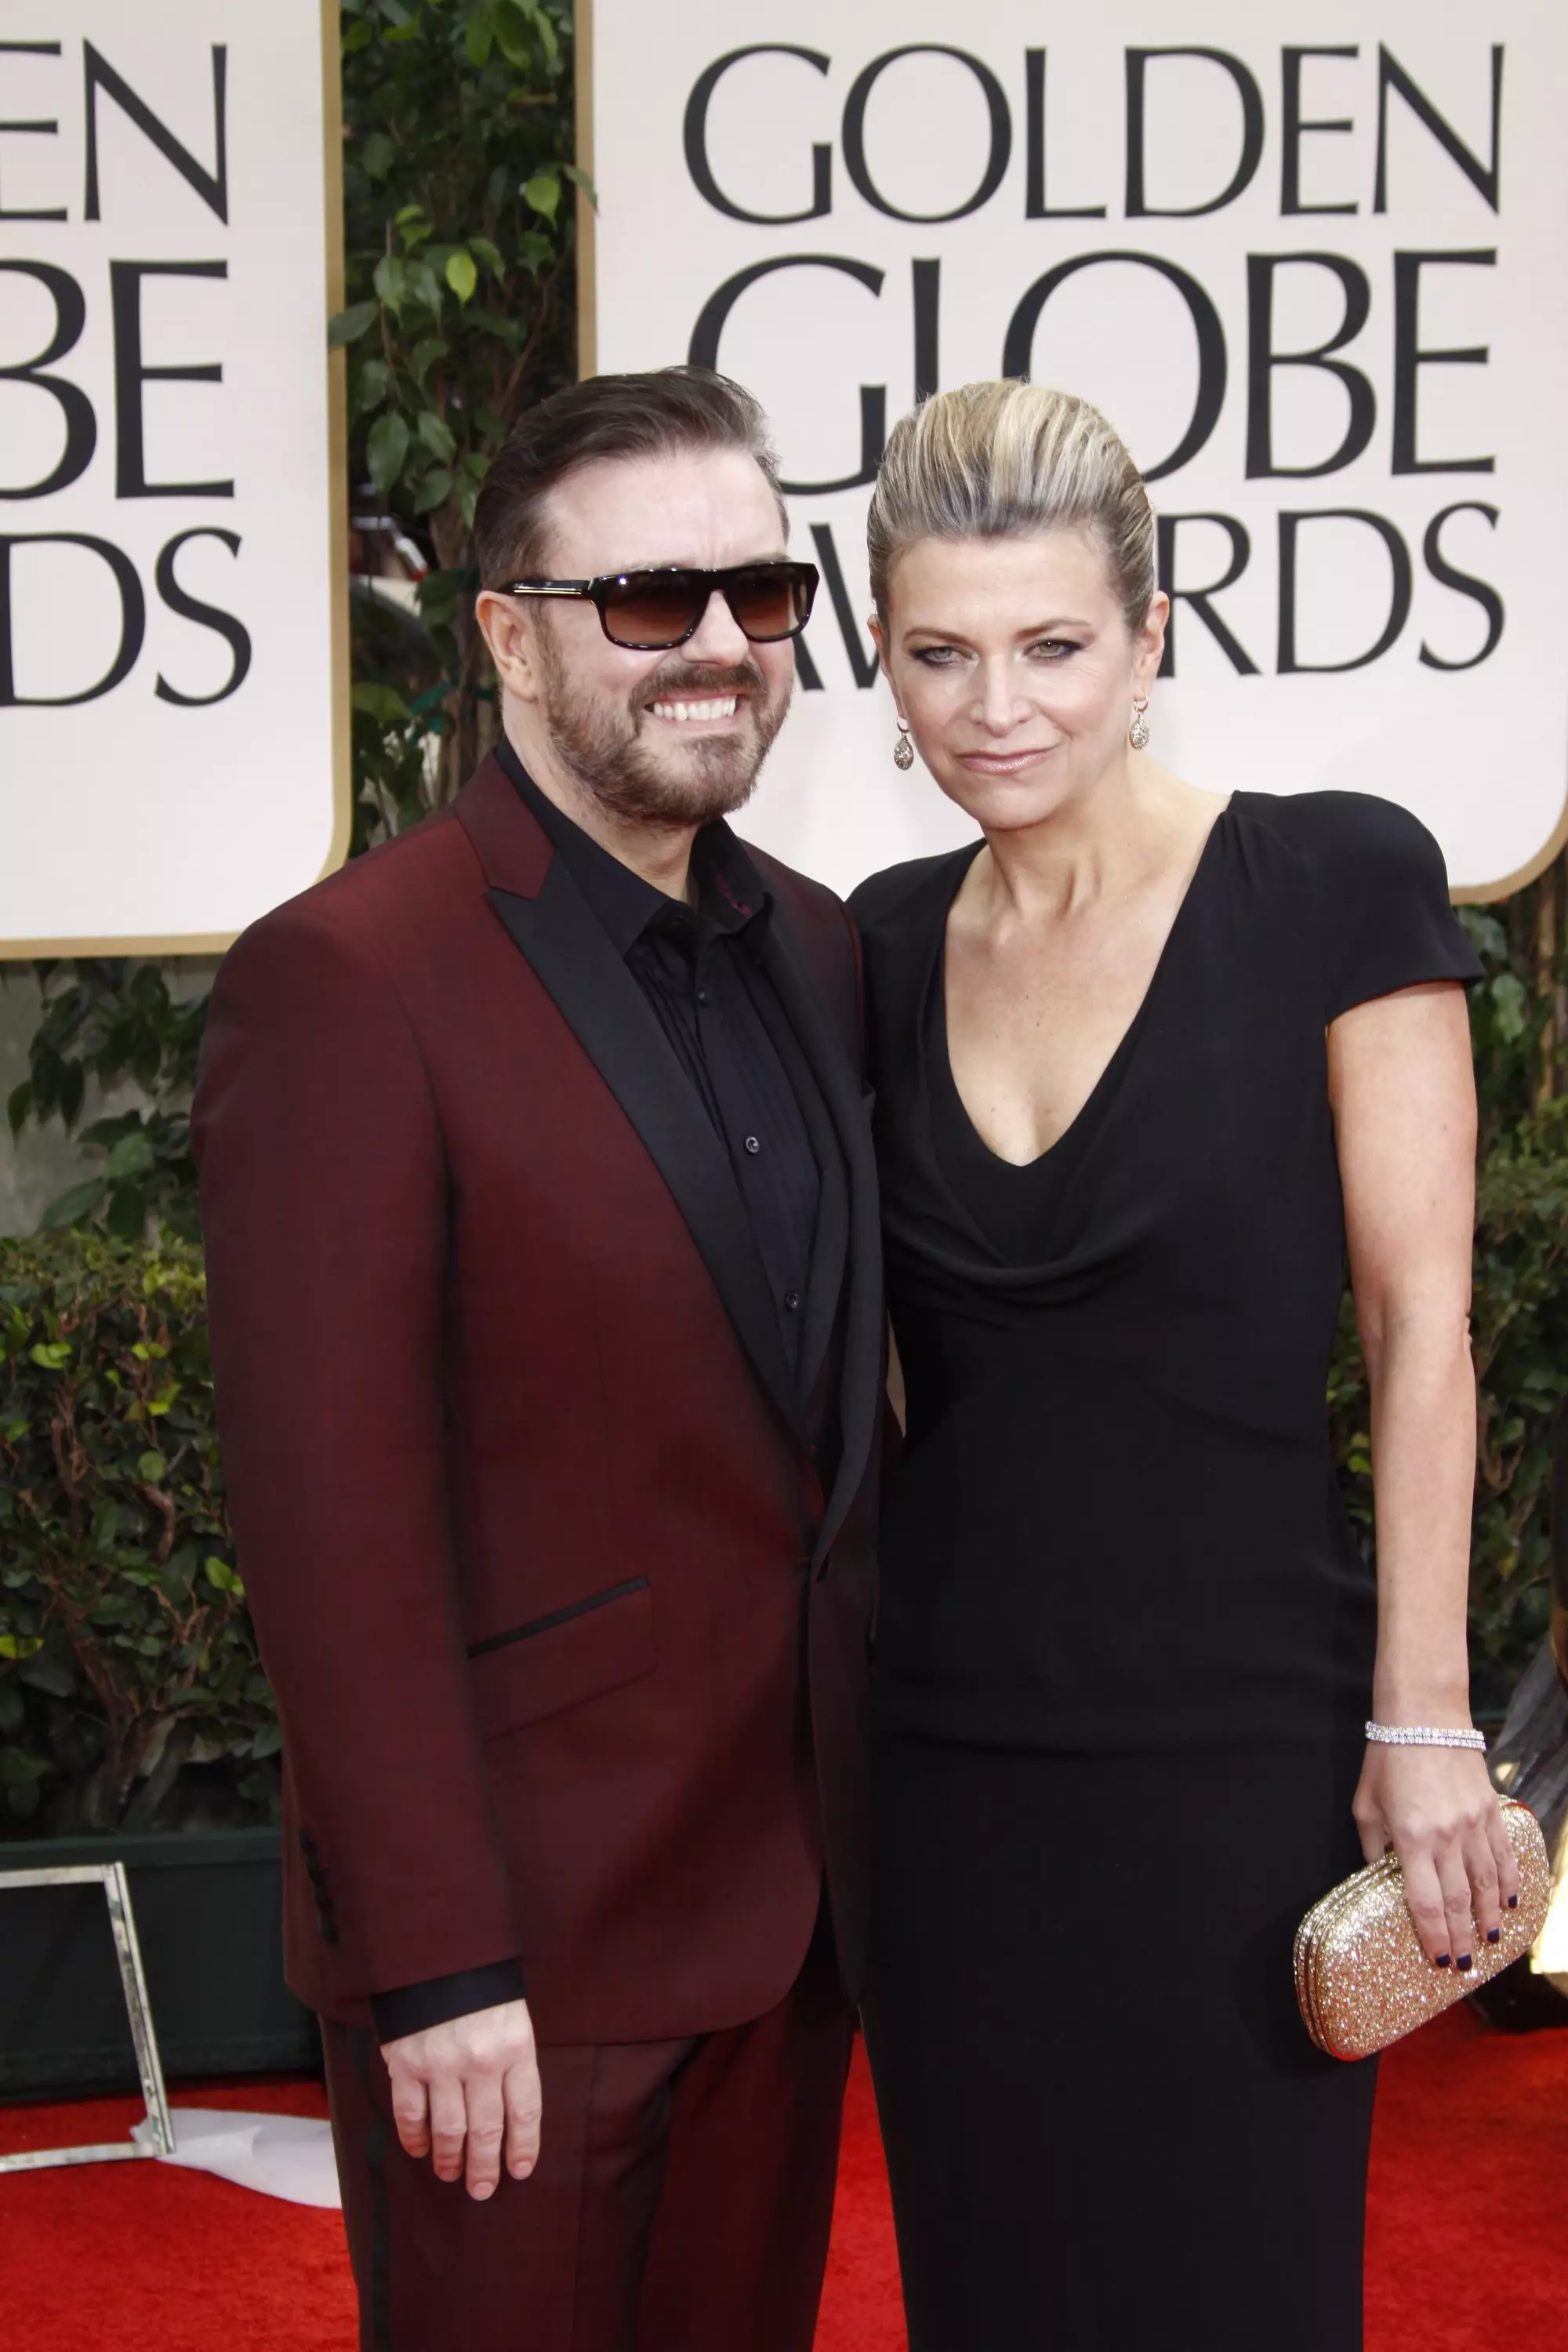 Ricky Gervais will host the Golden Globes for the fifth and last time.